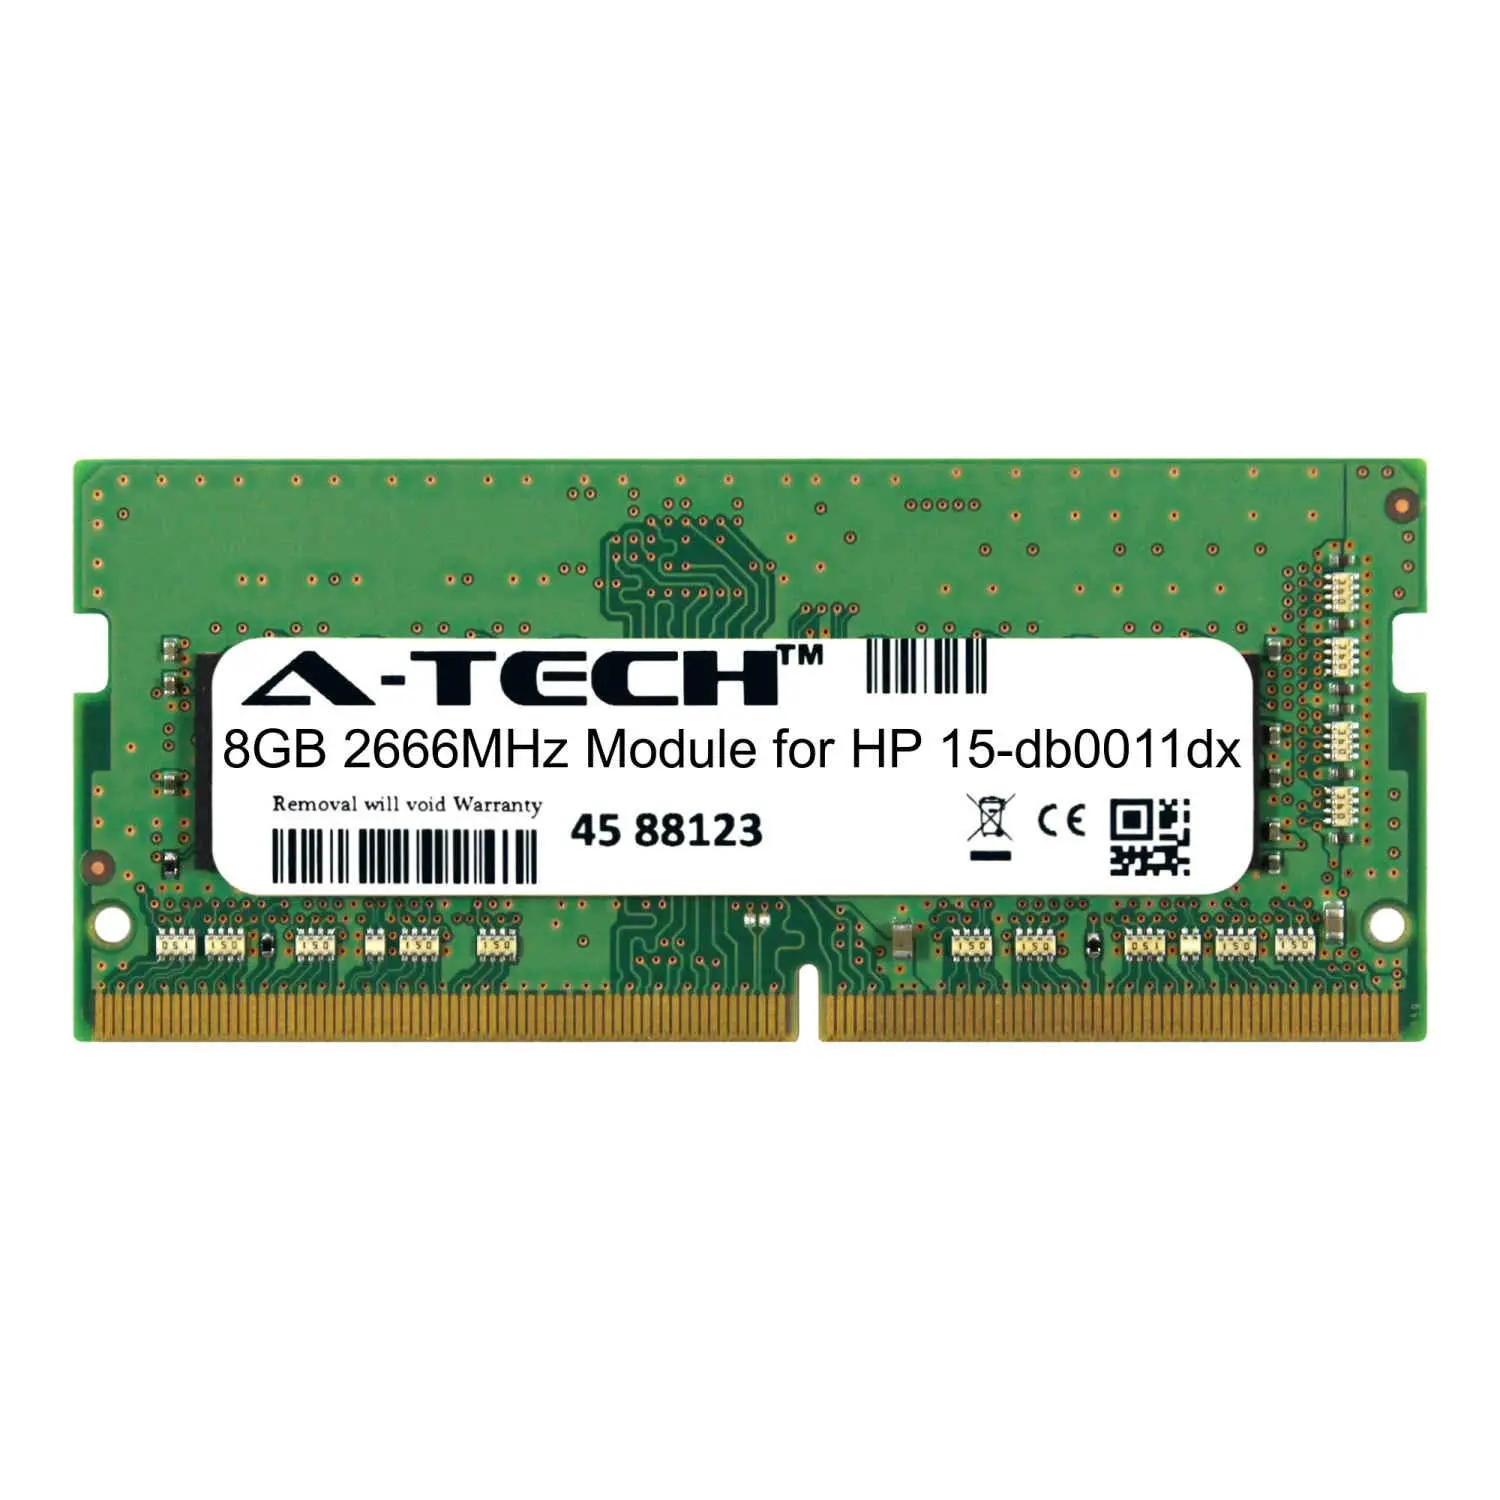 hewlett packard laptop hp 15-db0011dx memory upgrade - What is the max RAM for HP 15 db0015dx